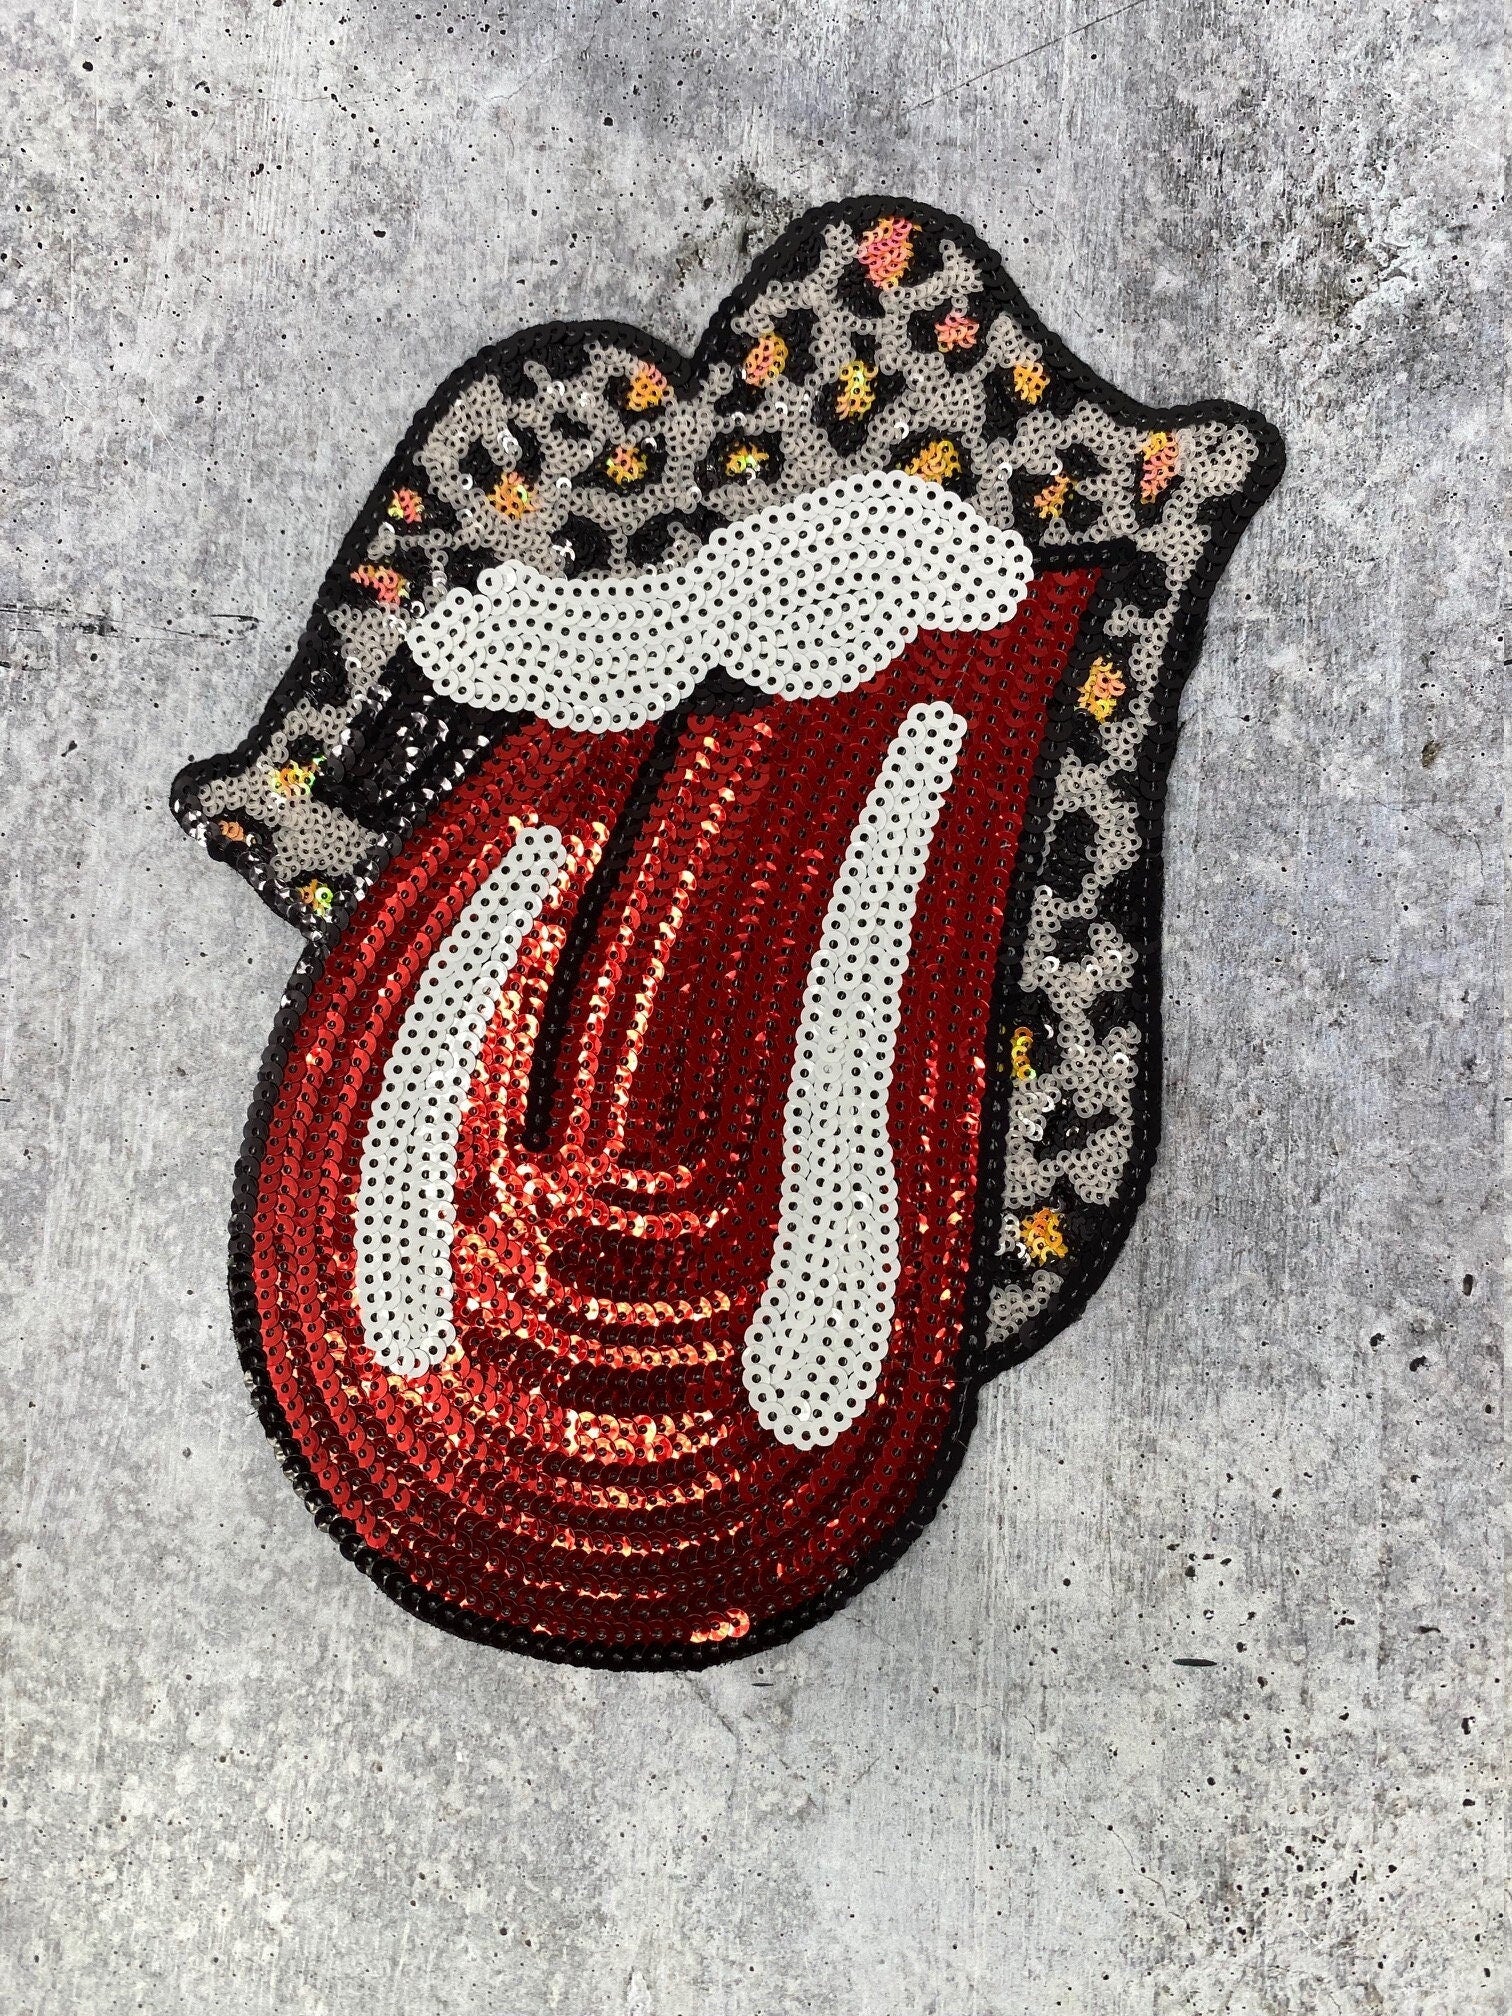 New, "Leopard" Sequins Lips and Tongue Patch (iron-on) Size 10", LARGE Bling Patch for Denim Jacket, Shirts, Hoodies, and More